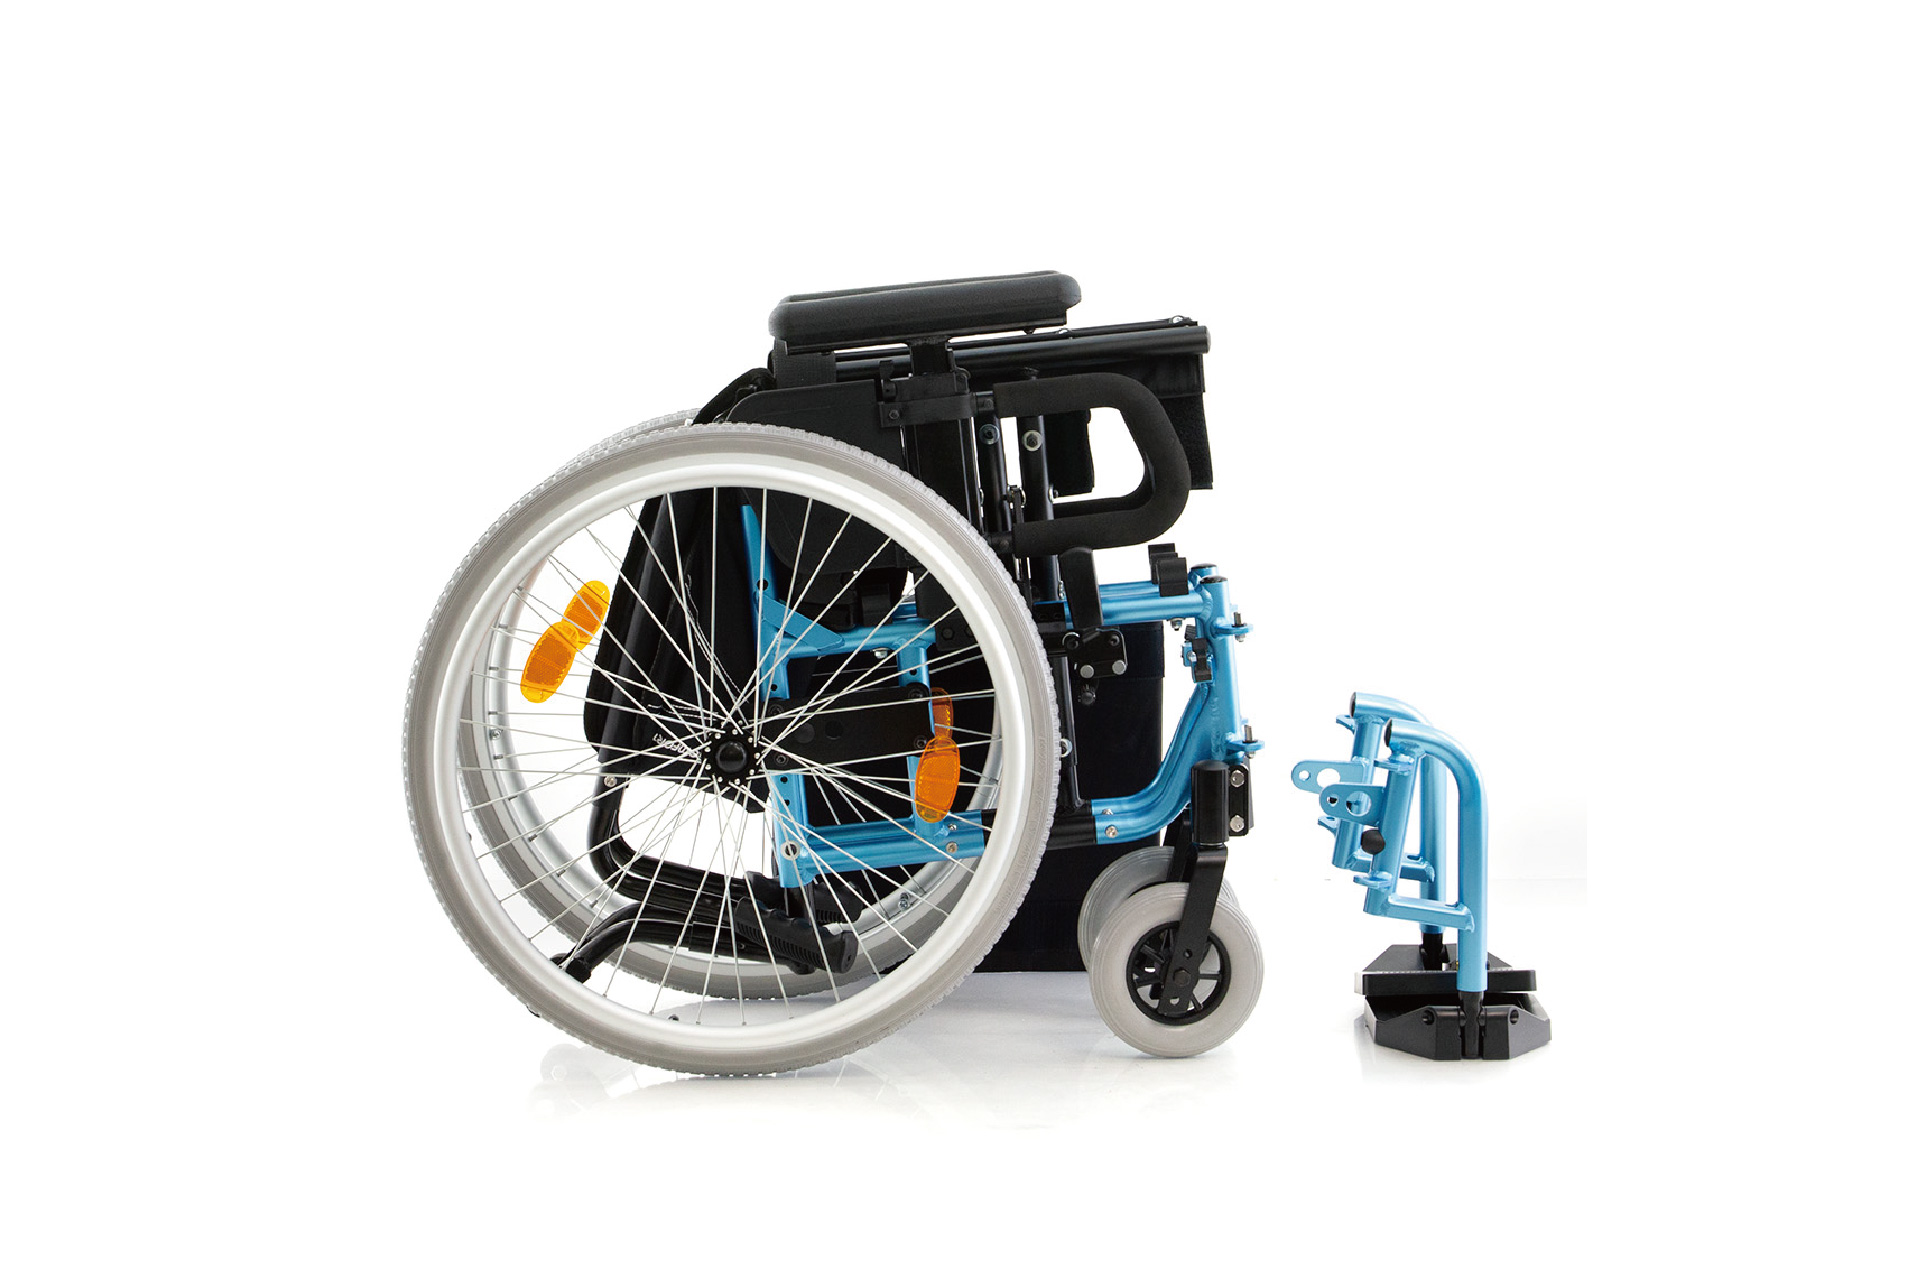 proimages/products/Manual_wheelchair/06_New_Growin/GROWIN_工作區域_10.jpg